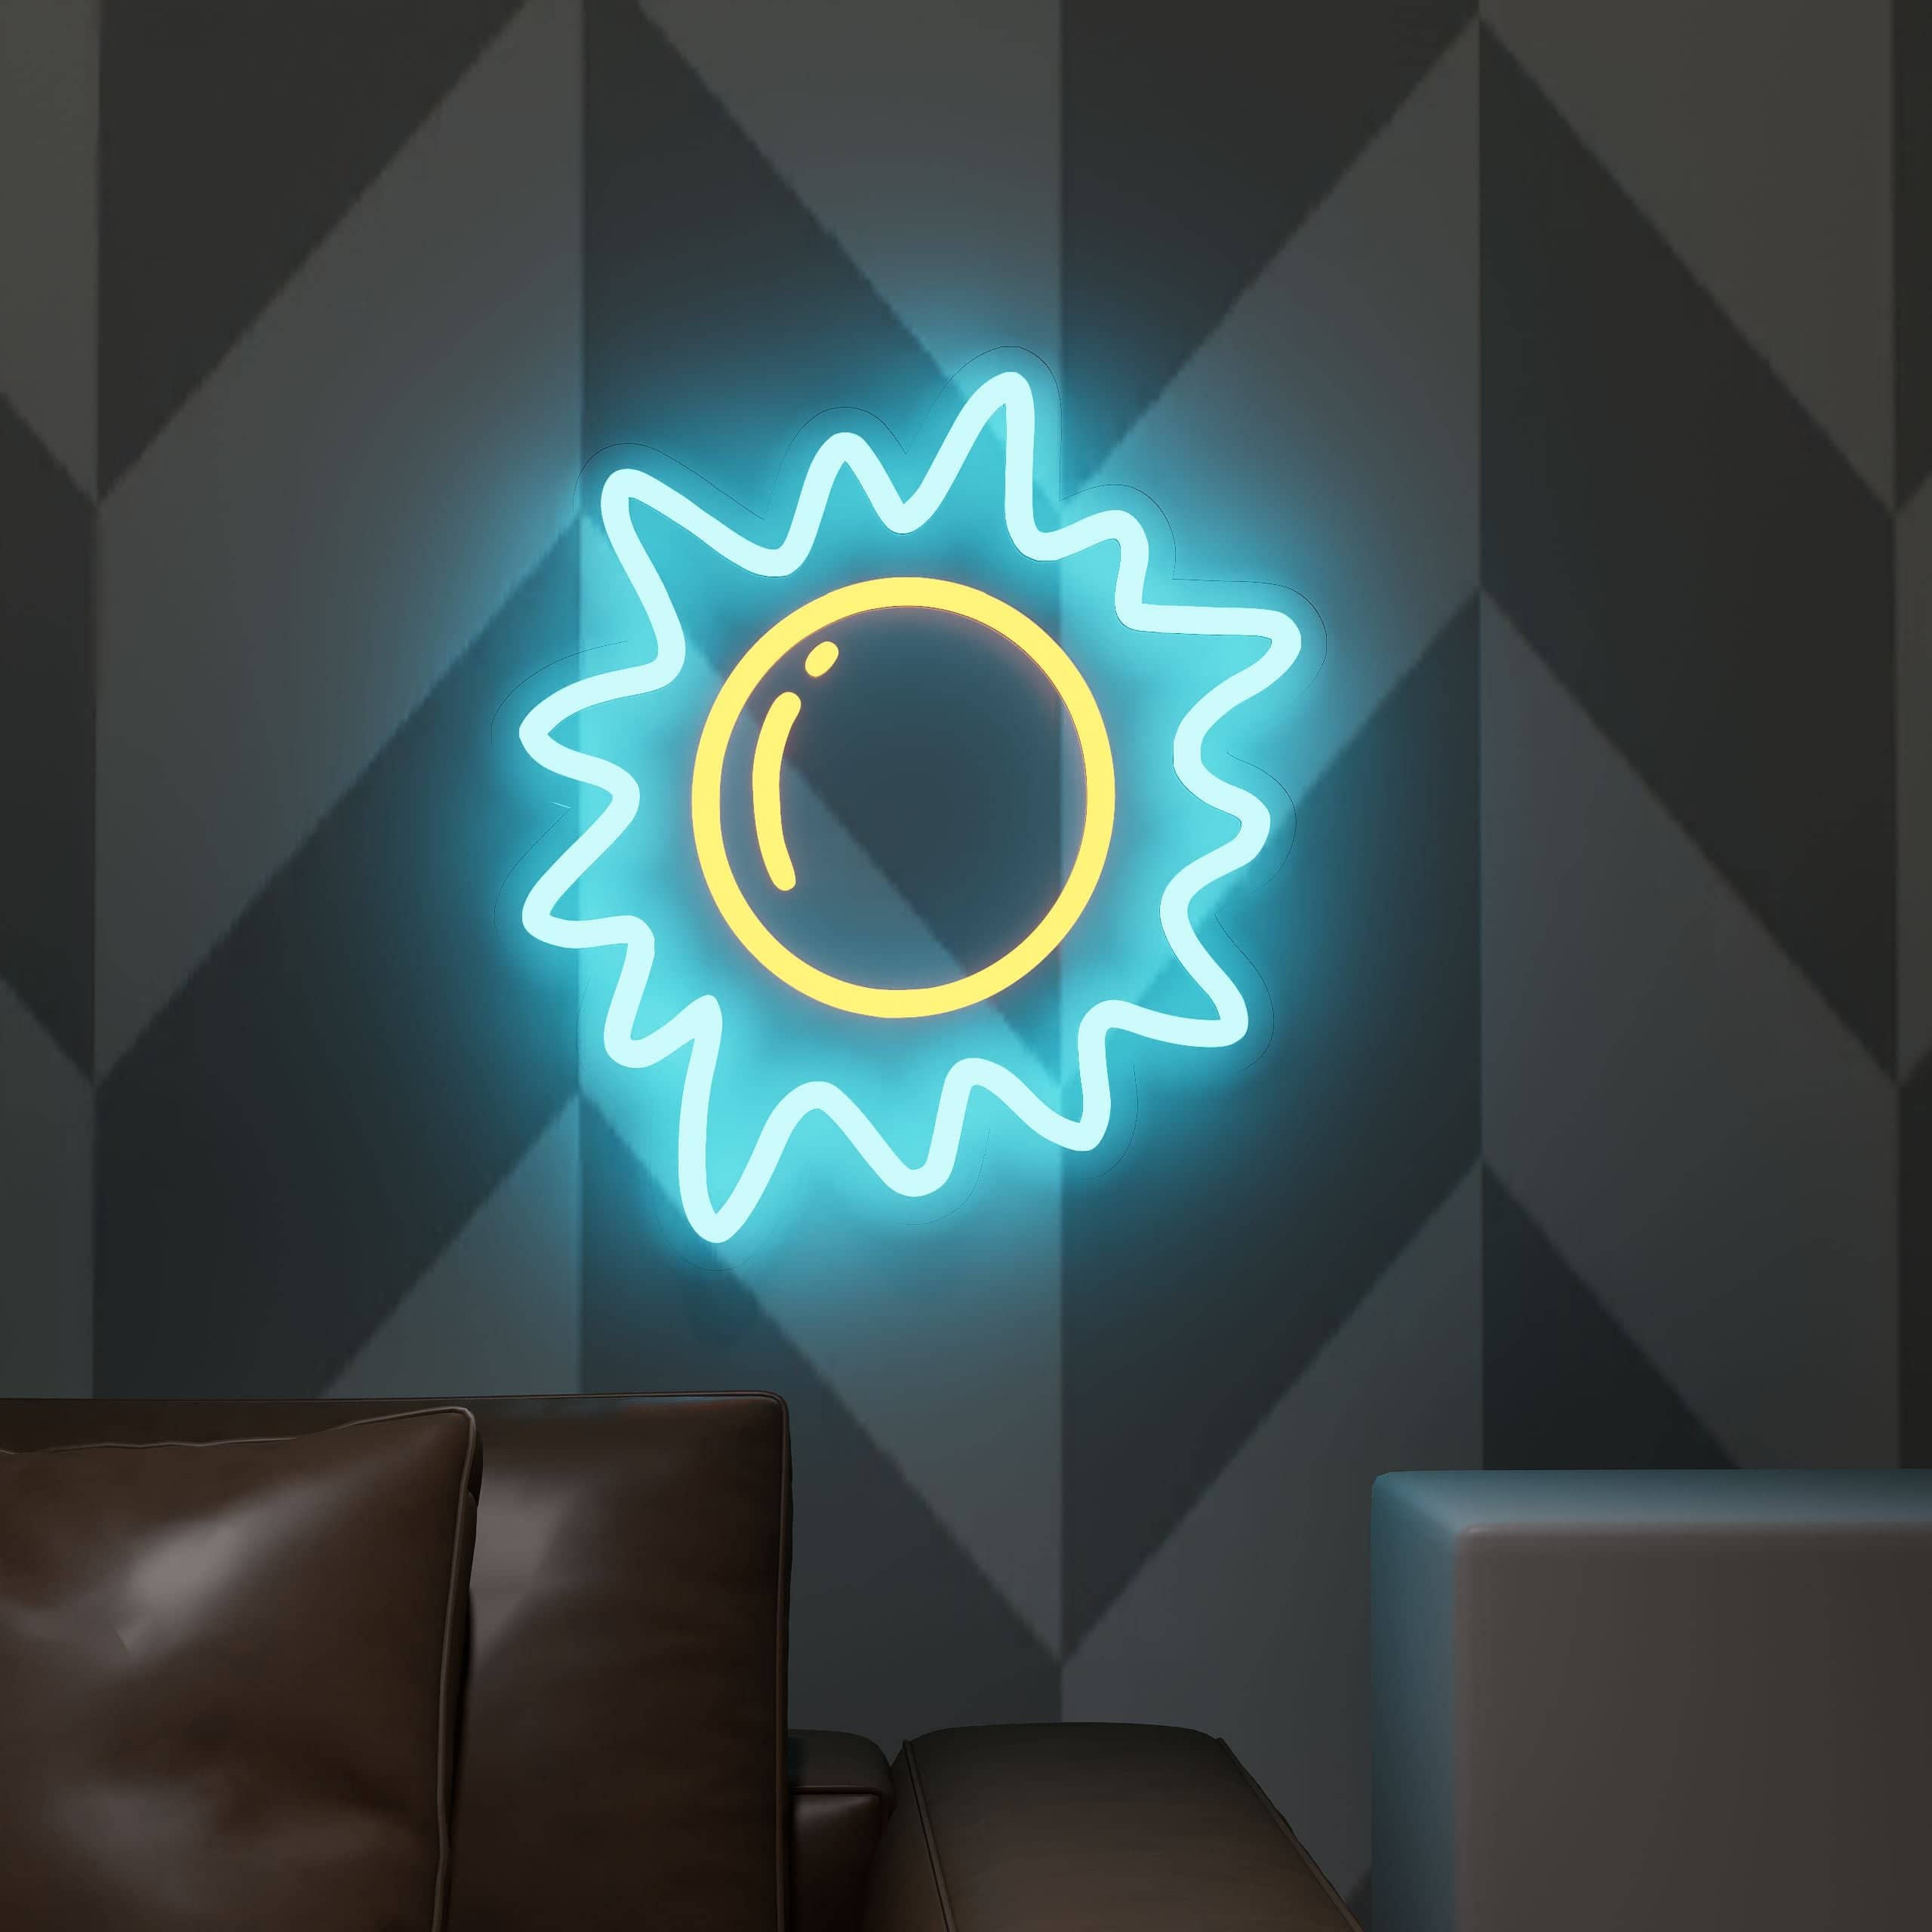 Cosmic Glowing Day Star shines brightly in kids rooms